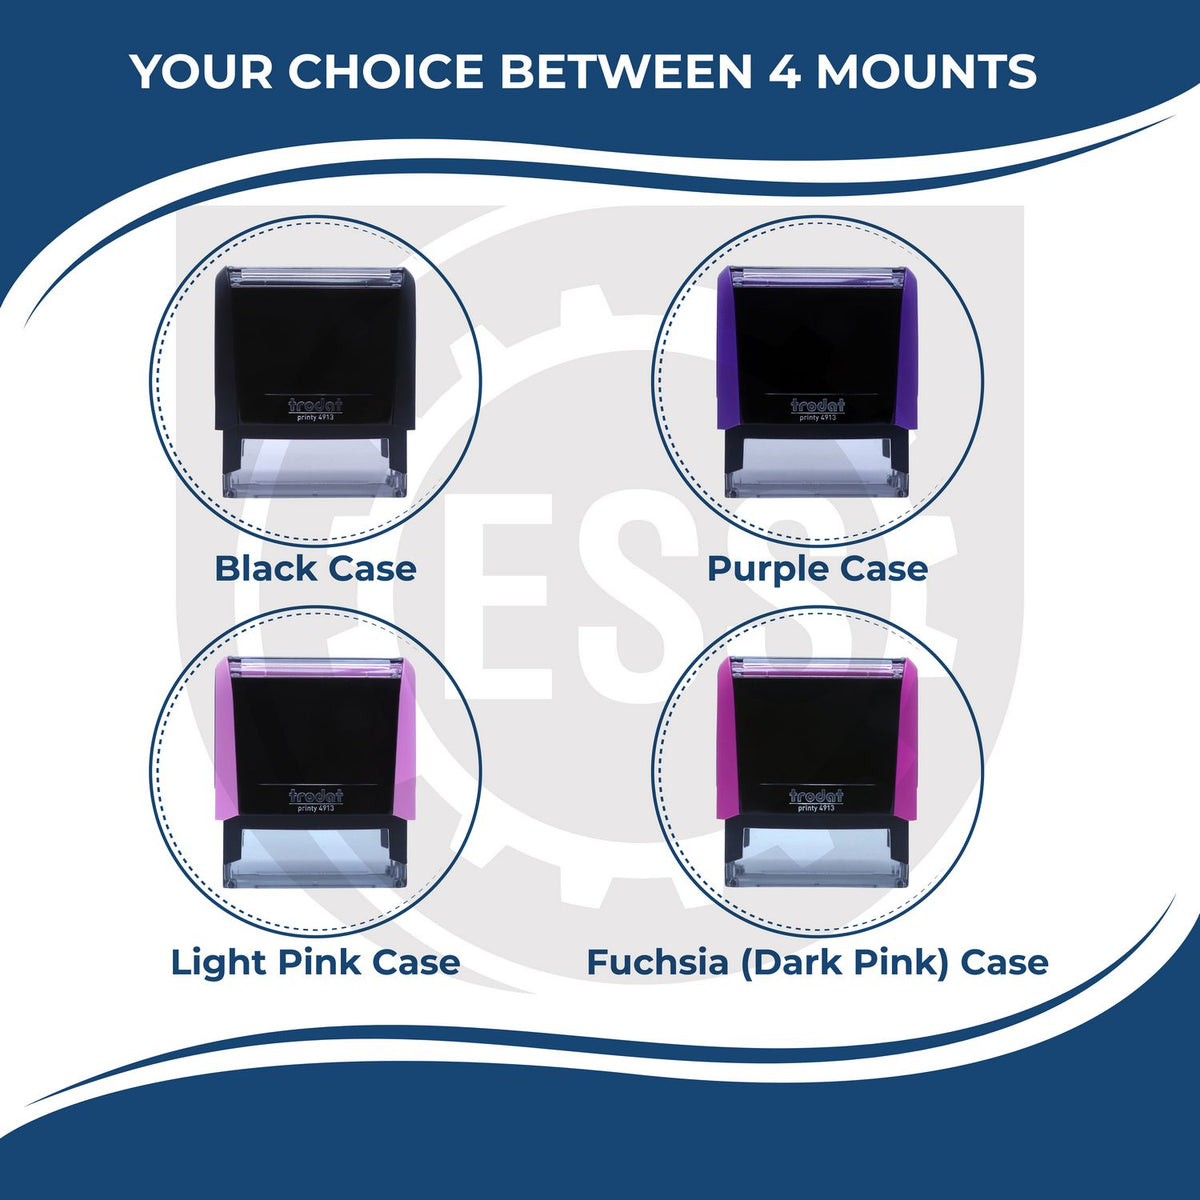 A picture of different colored mounts for the Self-Inking State Seal Connecticut Notary Stamp featurning a Red, Blue or Black Mount